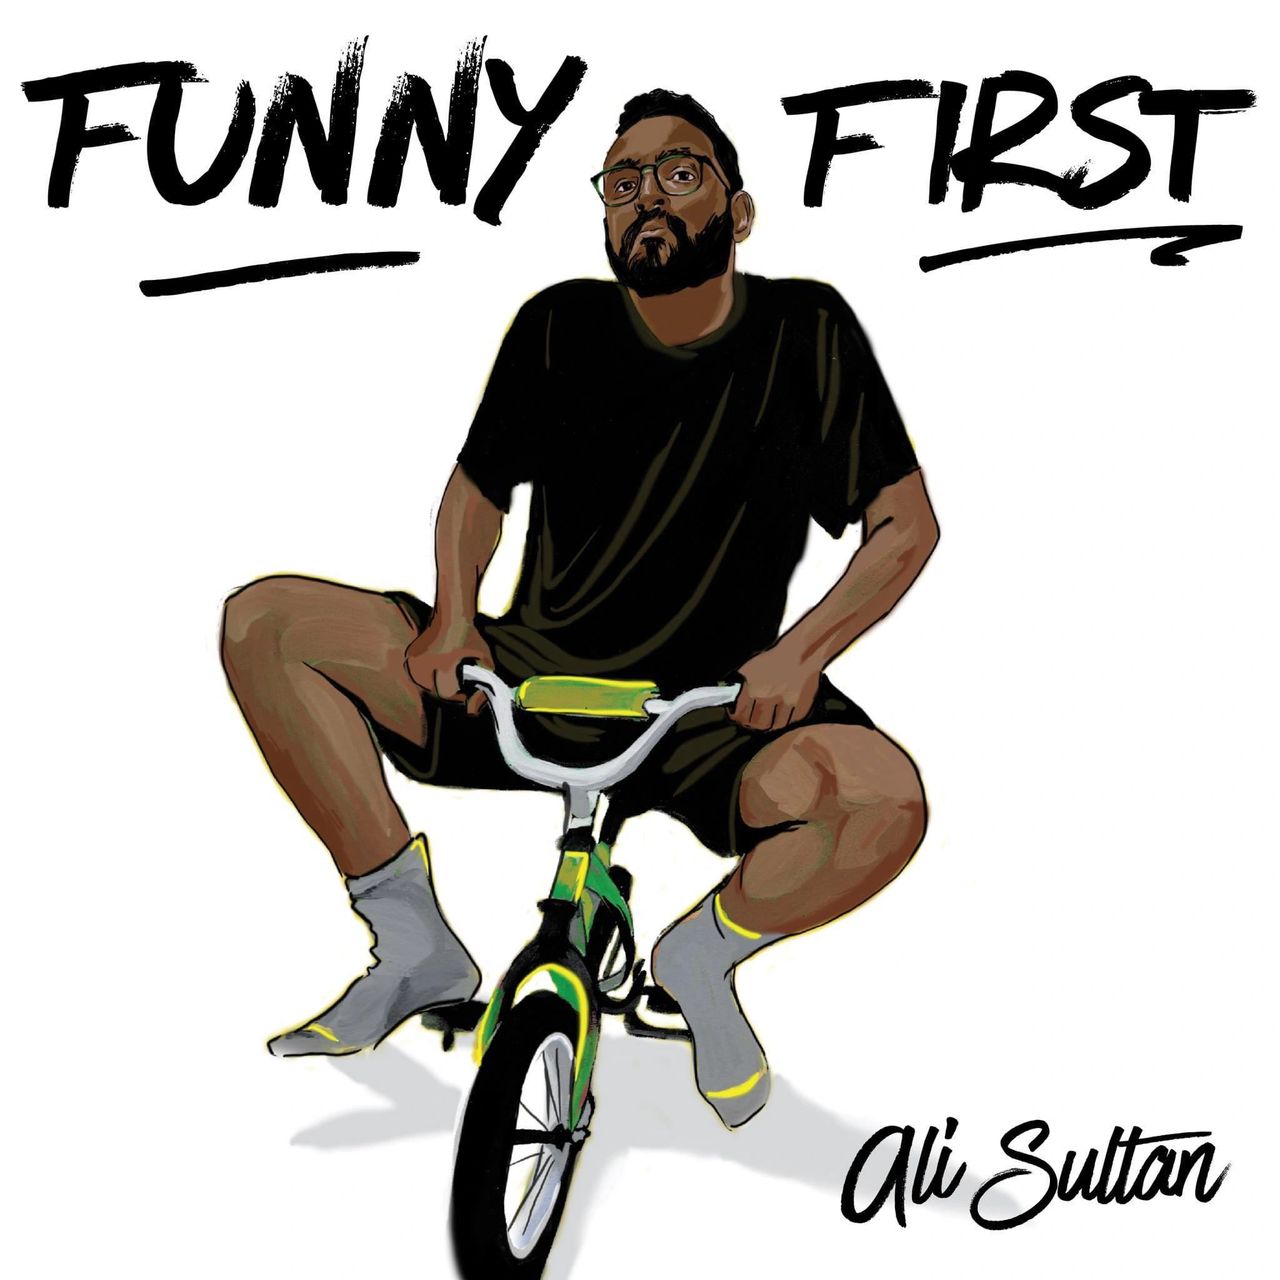 Ali Sultan's puts 'Funny First' on new album out today